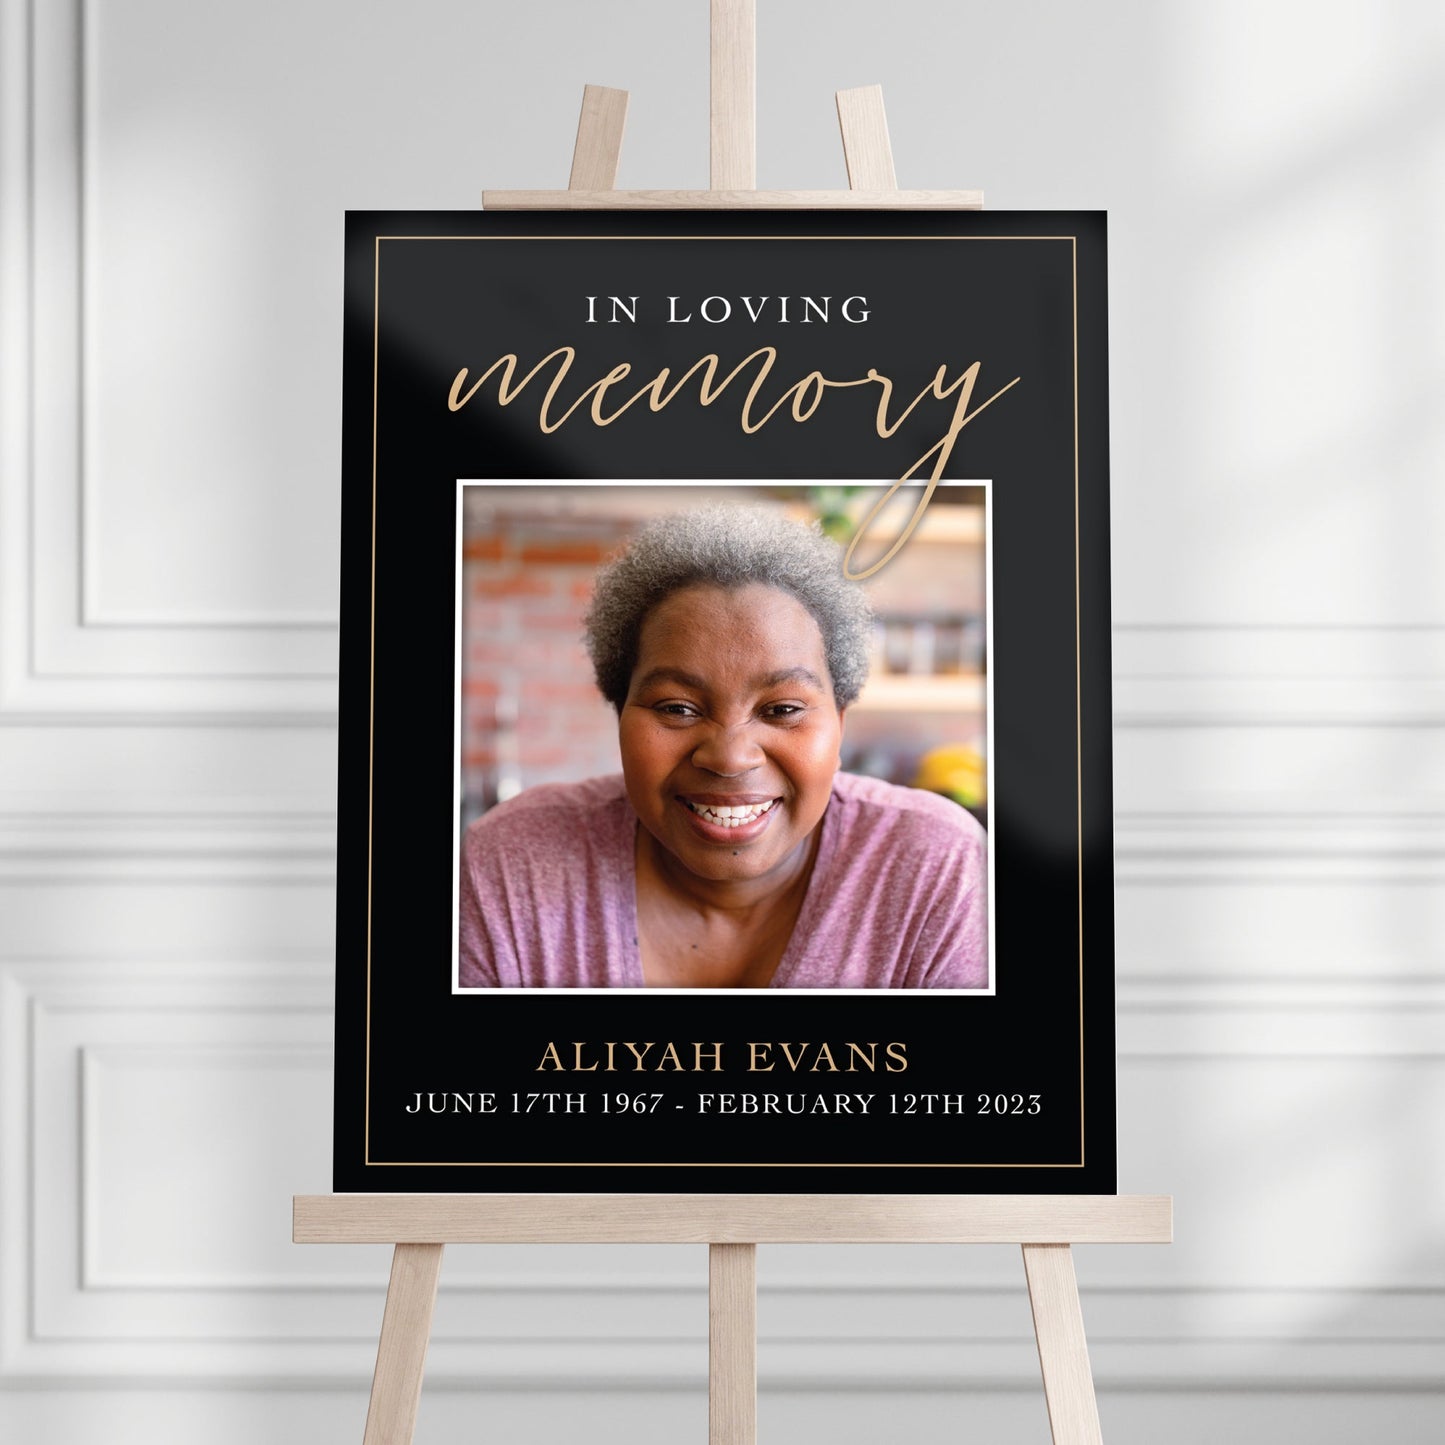 Celebration of Life Welcome Sign